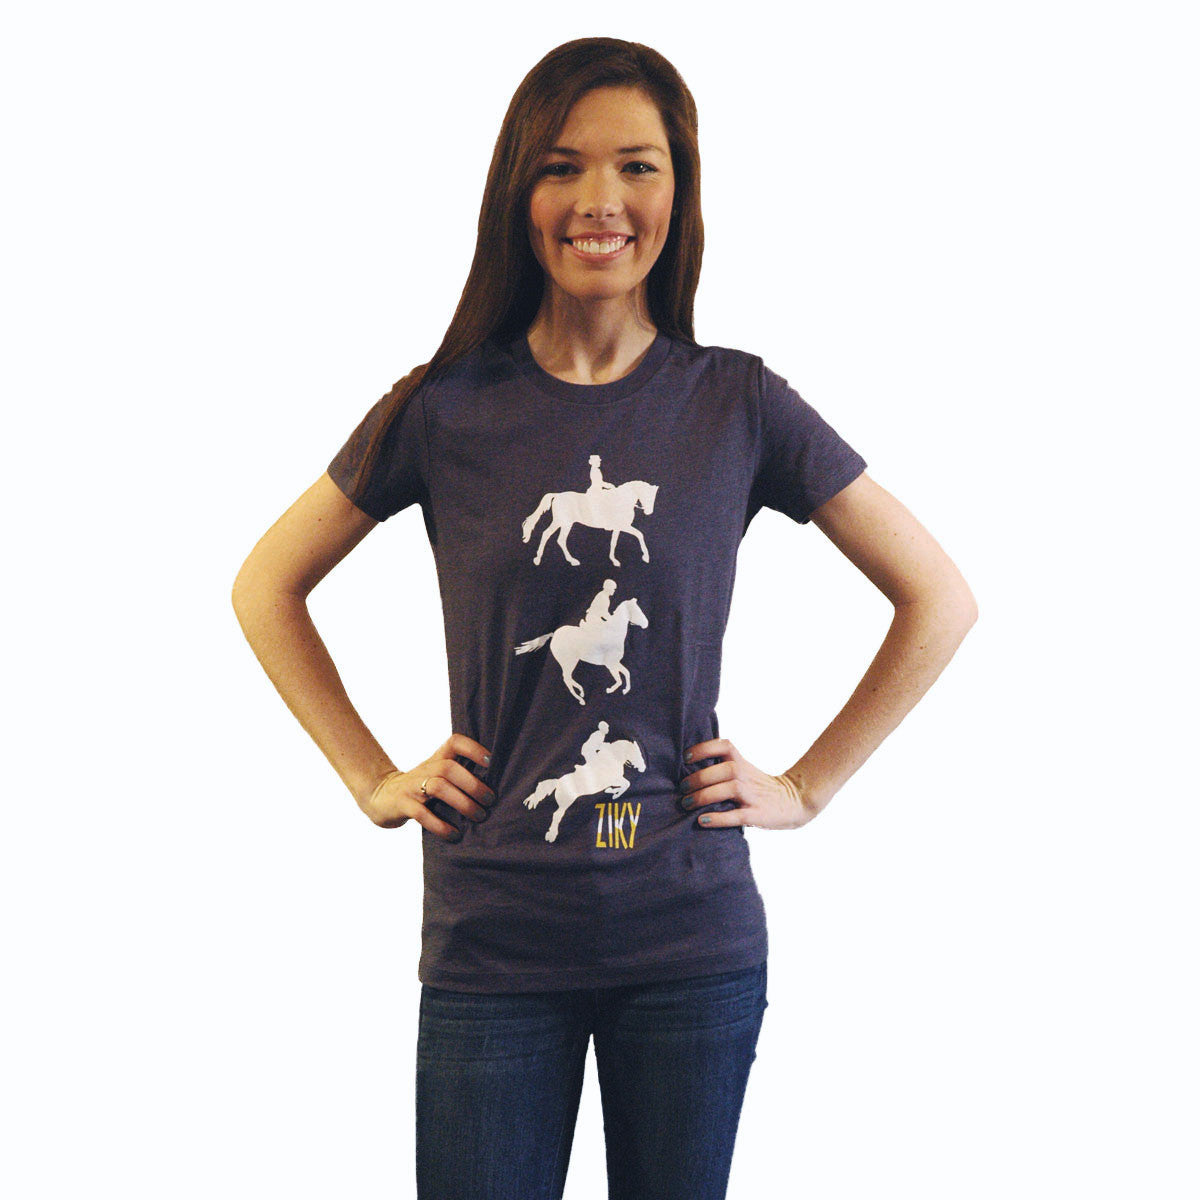 Eventing graphic horse shirt